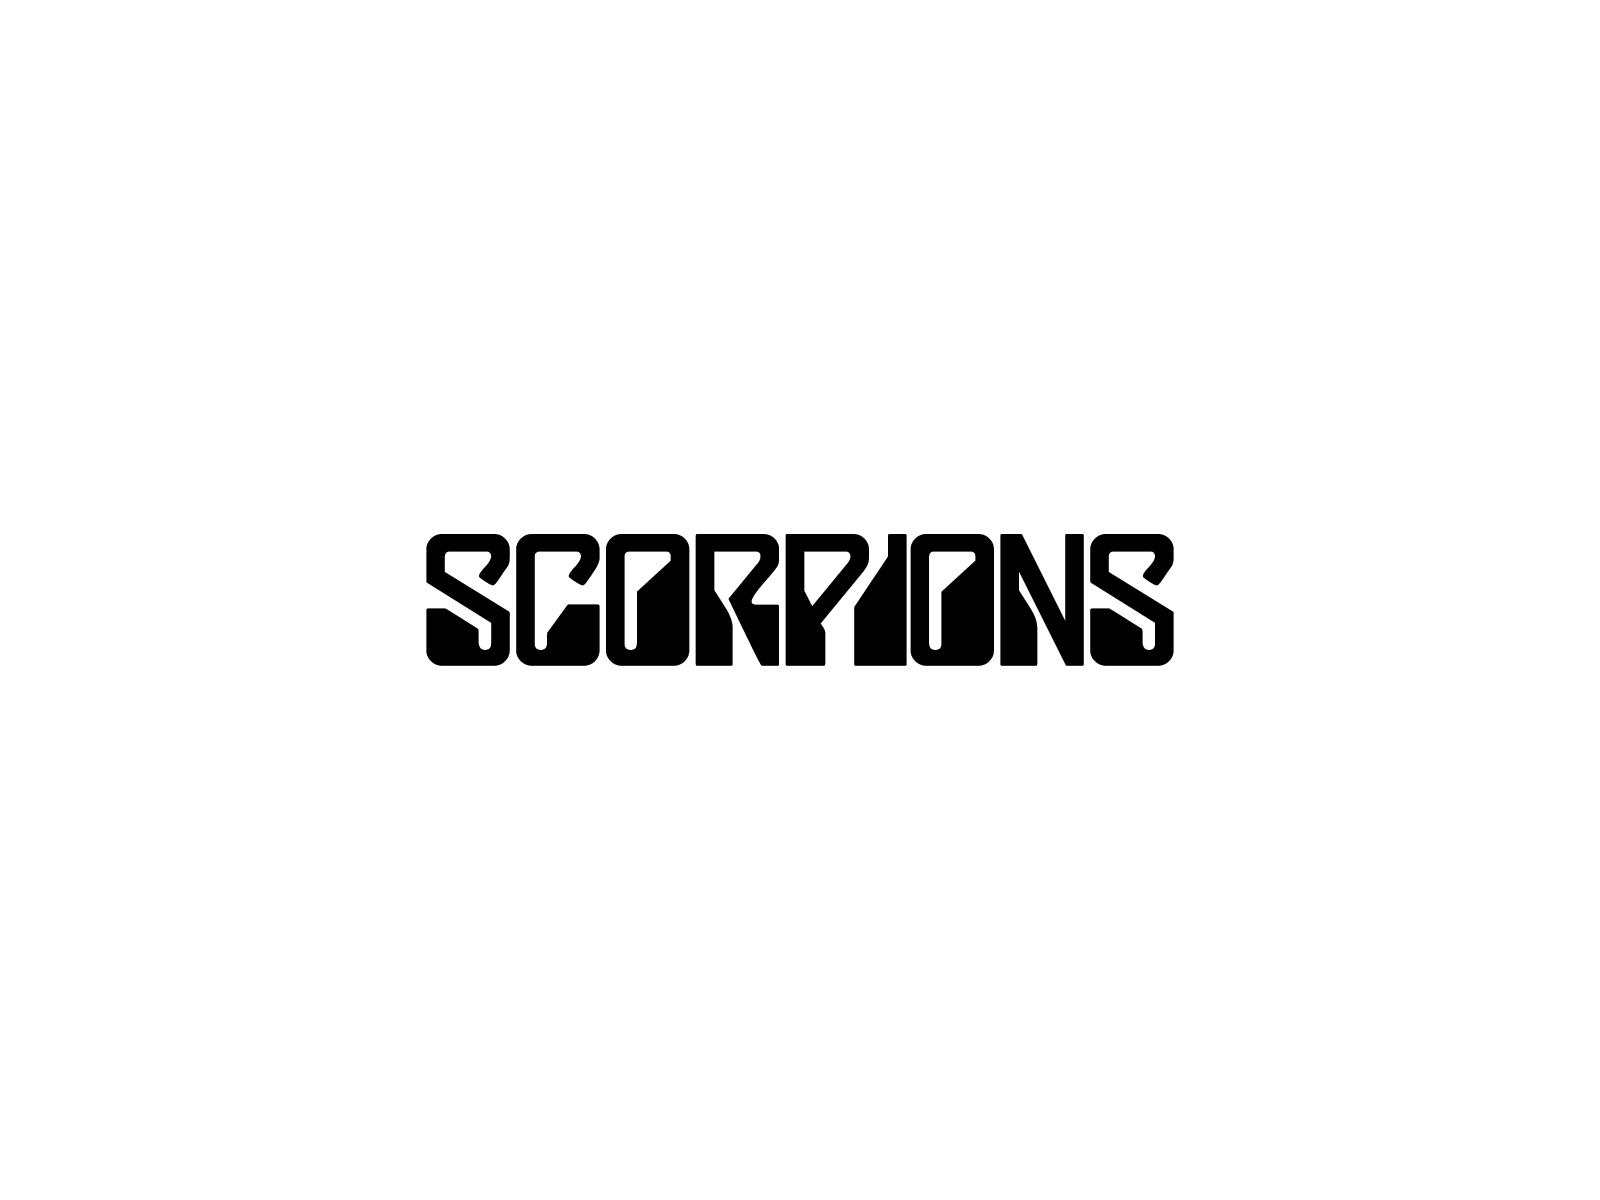 Scorpions Wallpaper and Background Imagex1200